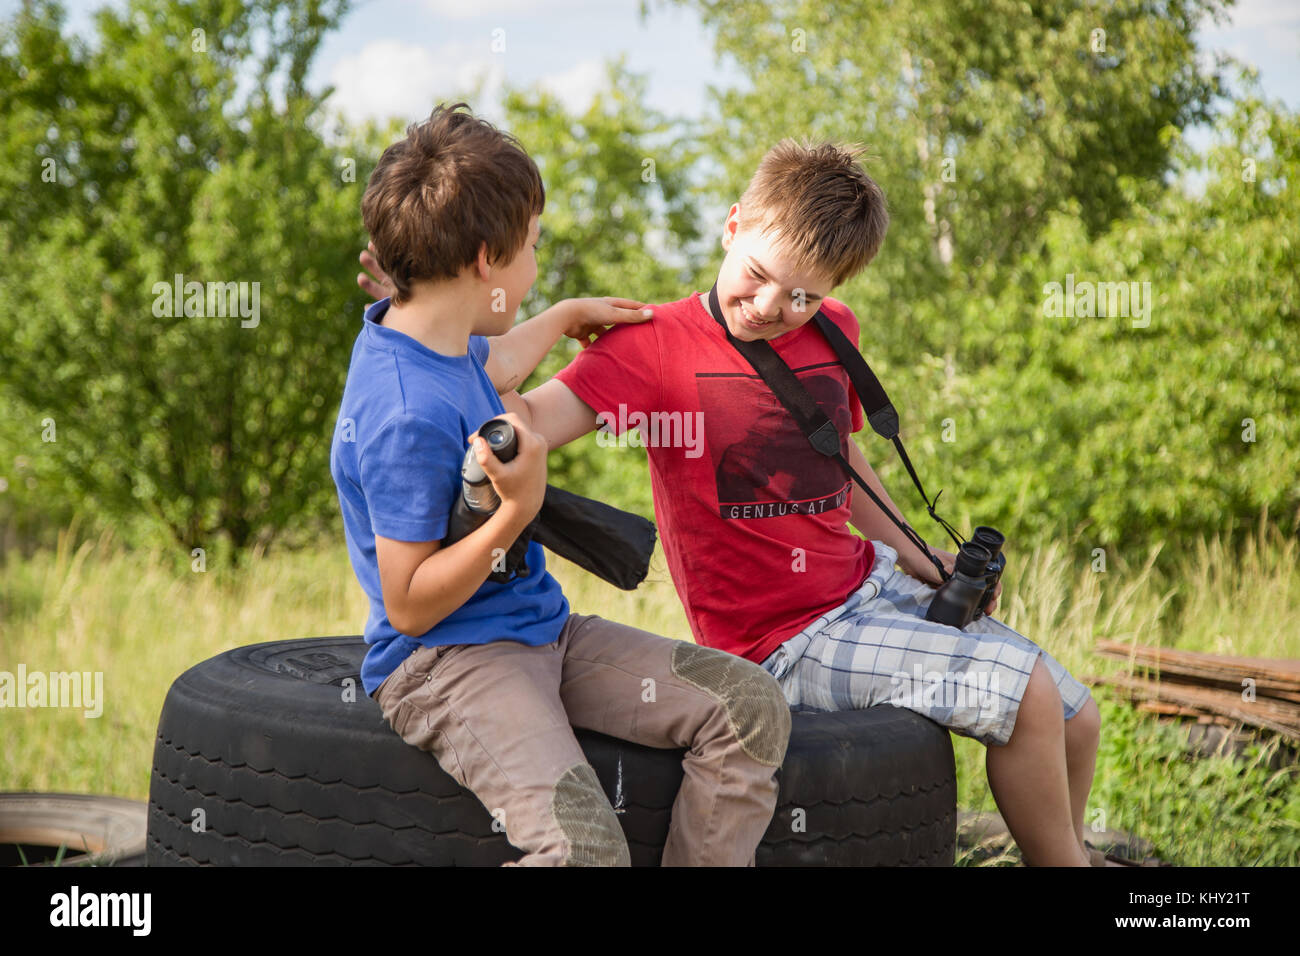 Brothers having fun whilst posing. Boys portrait, young little cute and adorable kids, little obstreperous scamps. Poses, face expressions, ease. Stock Photo